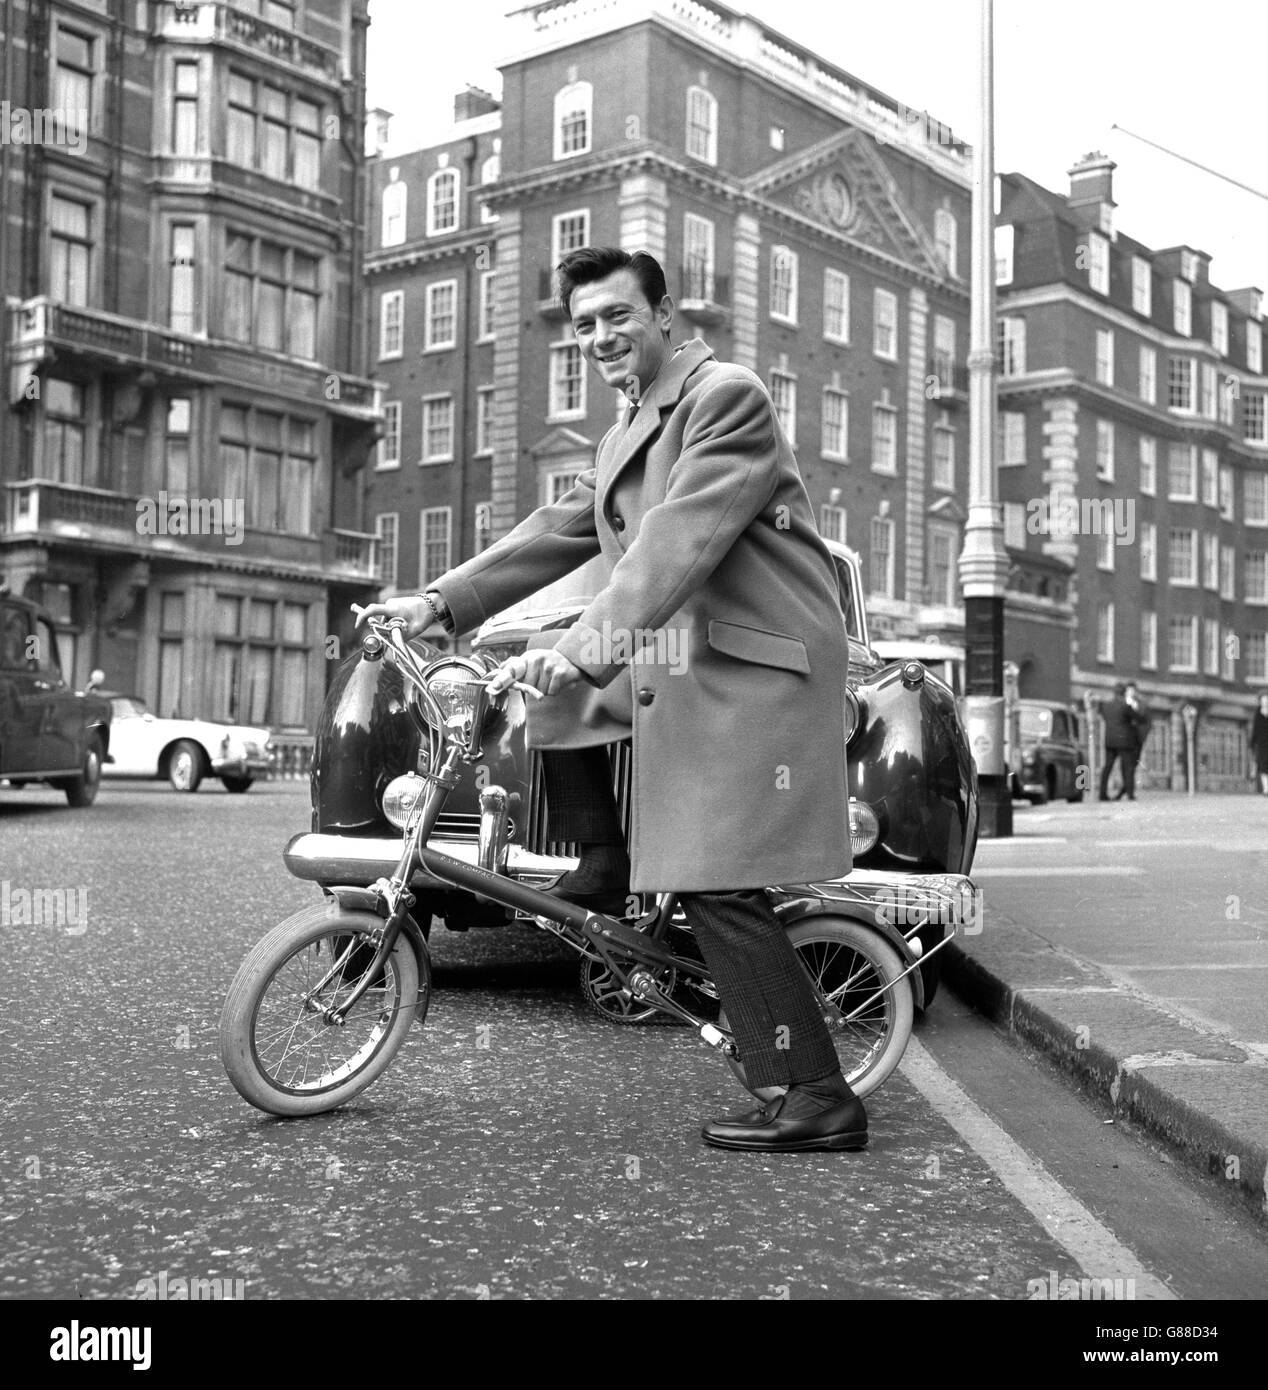 Film star Laurence Harvey has found two wheels the best means of beating the traffic jams in big cities. He bought this Raleigh Compact folding bicycle, which packs easily into the boot of his car. If necessary, he can park on the outskirts and cycle in. Laurence, star of 'Life at the Top', purchased the bike in London so that he could take it back to the States. Stock Photo